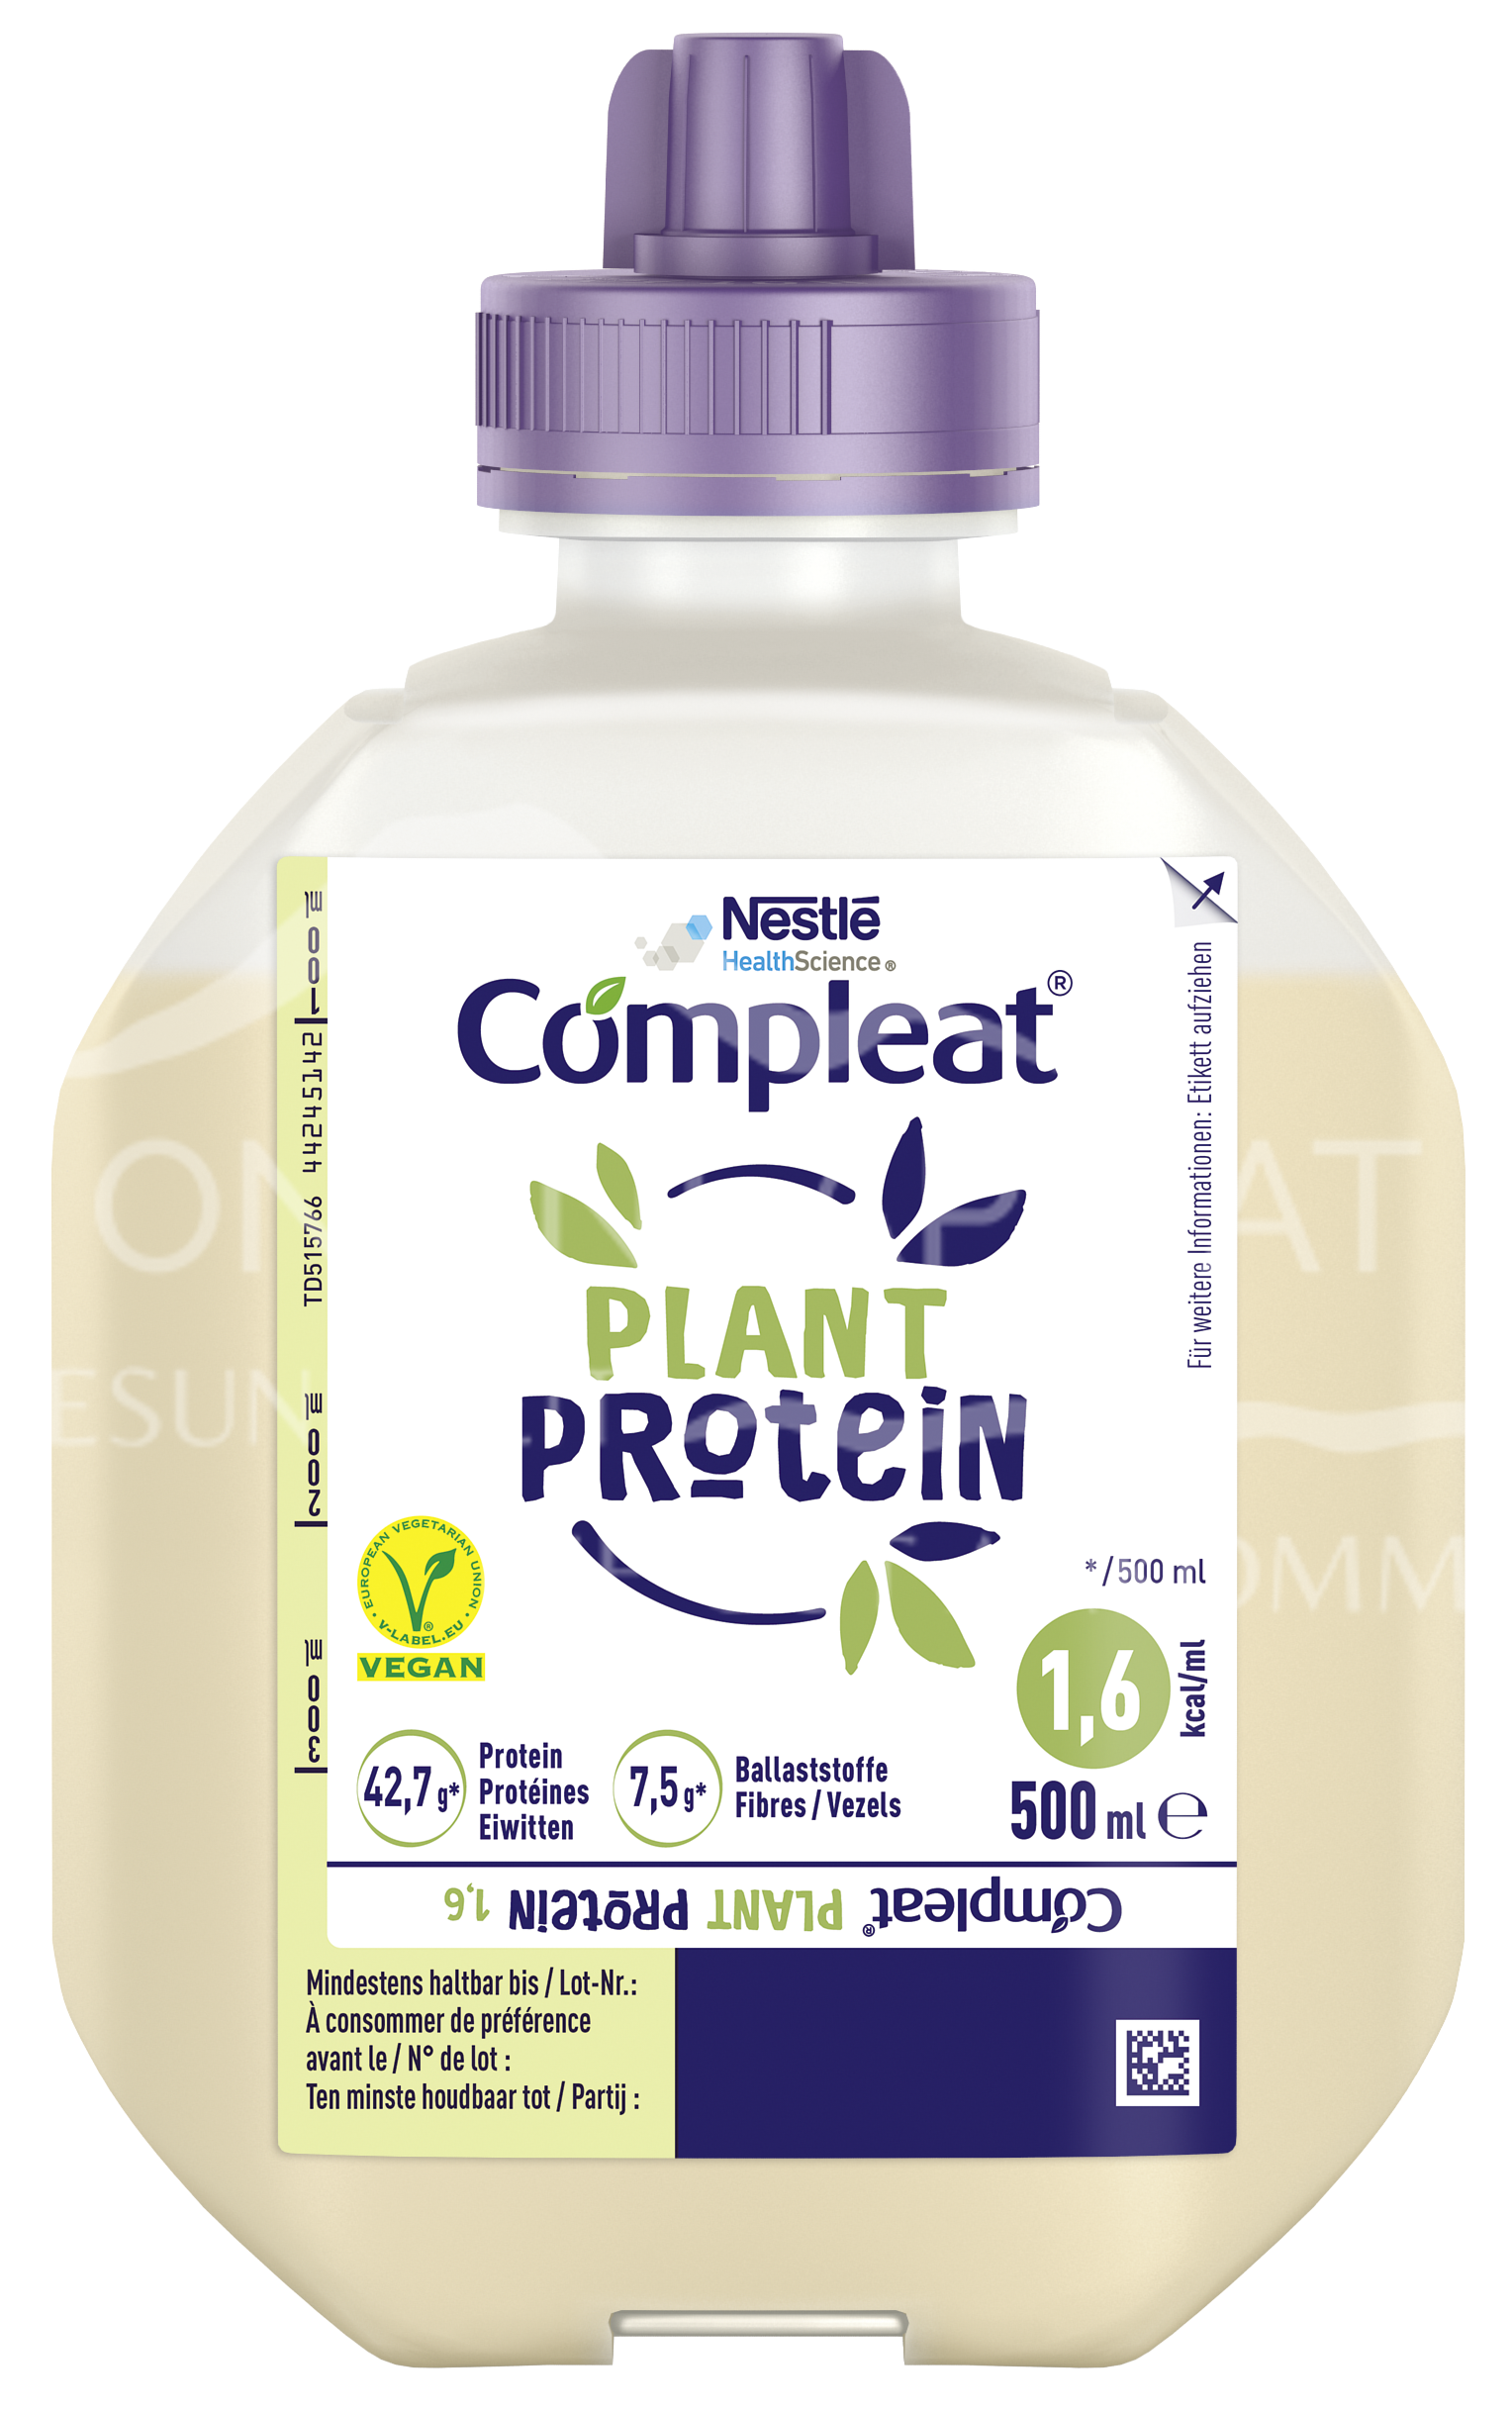 Nestlé Compleat® PLANT PROTEIN 1.6 500 ml